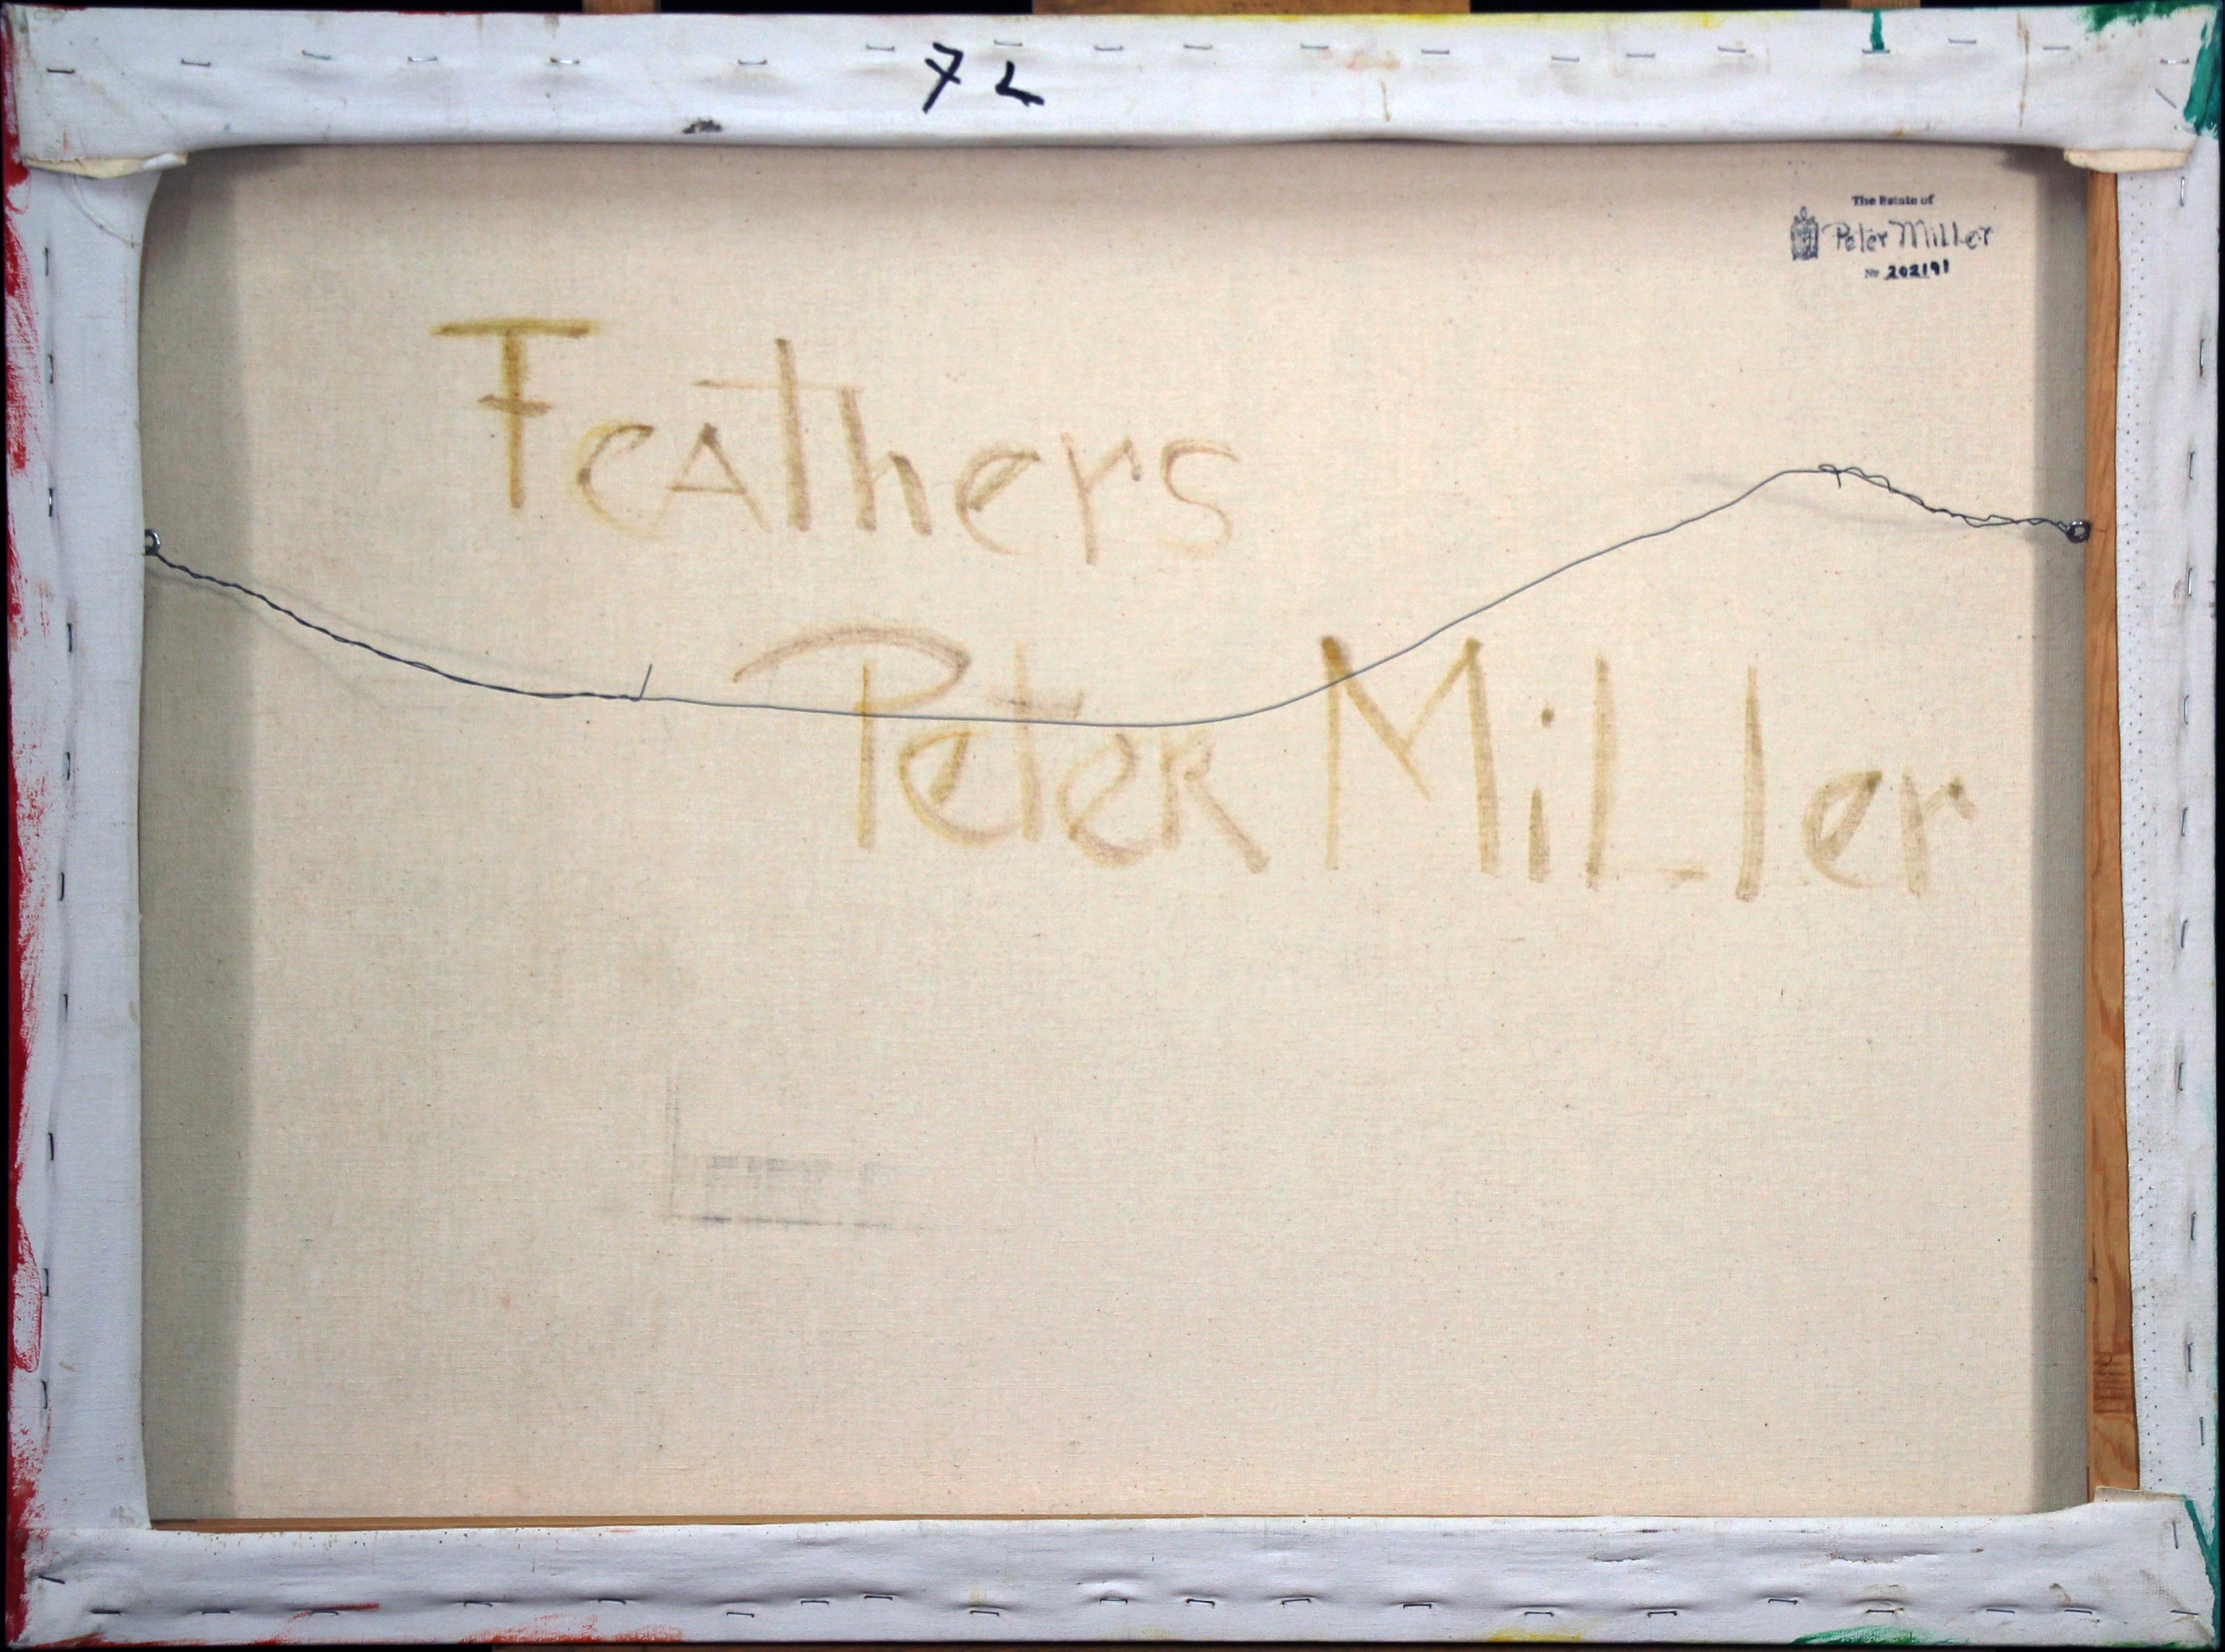 Feathers, Mystical and Spiritual Commentary by Female Modernist - American Modern Painting by Peter Miller